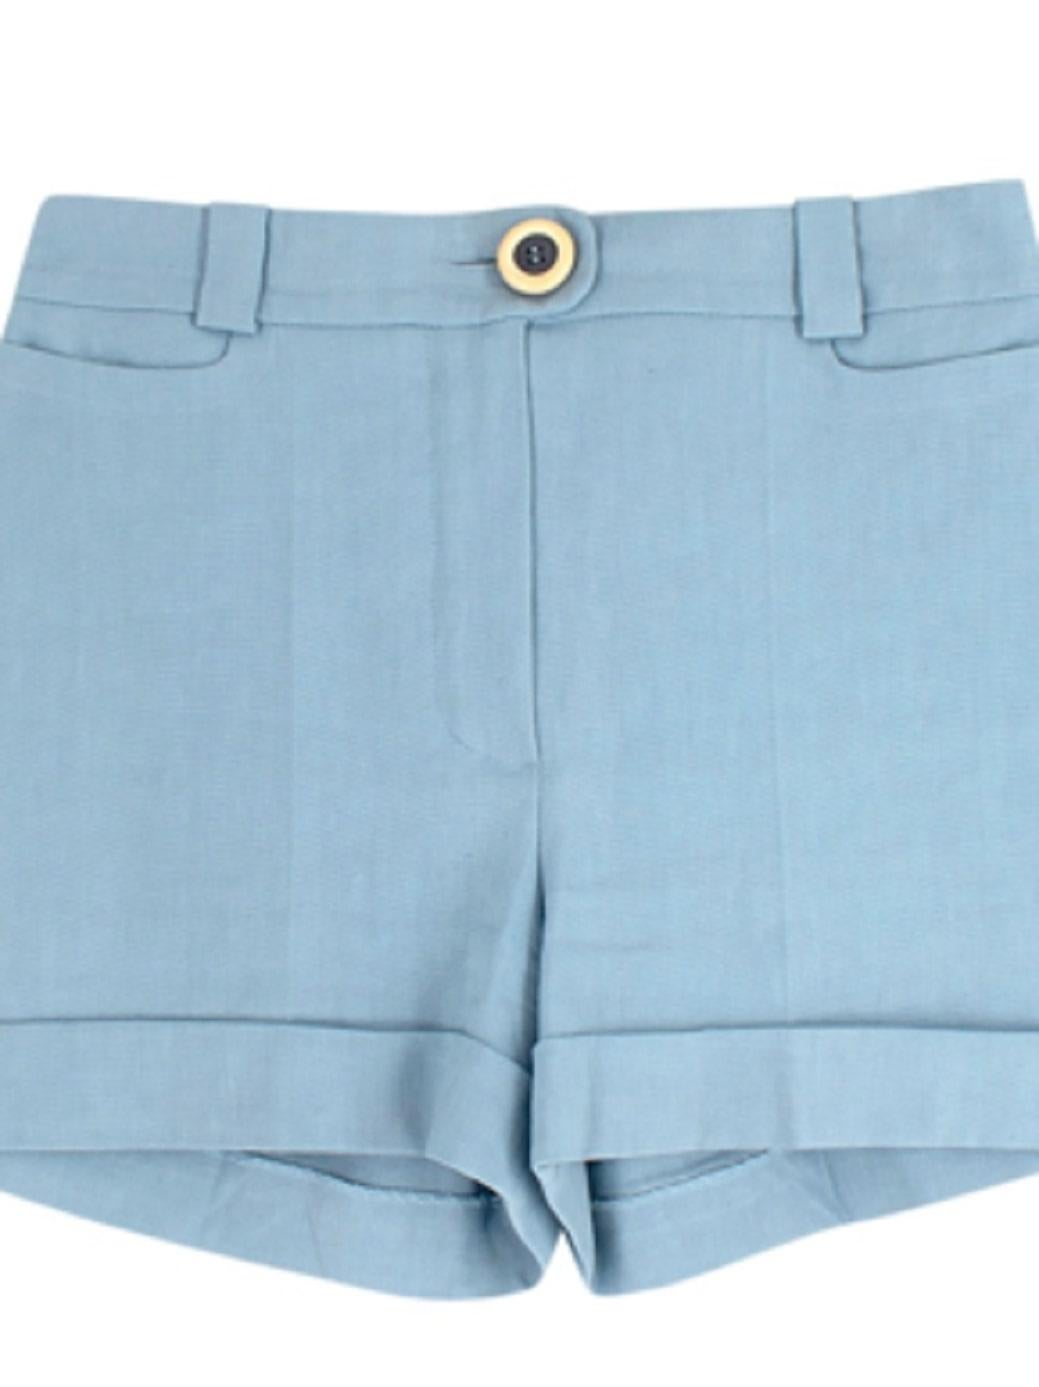 Chloé Powder Blue Tailored Shorts

- Power blue, cotton tailored Chloé shorts
- Cream, shell fabric centre button
- 2 front pockets, and 2 illusion pockets on back
- Belt loops around waistband

Materials:
100% Cotton
Shell

Made in France
Dry-clean